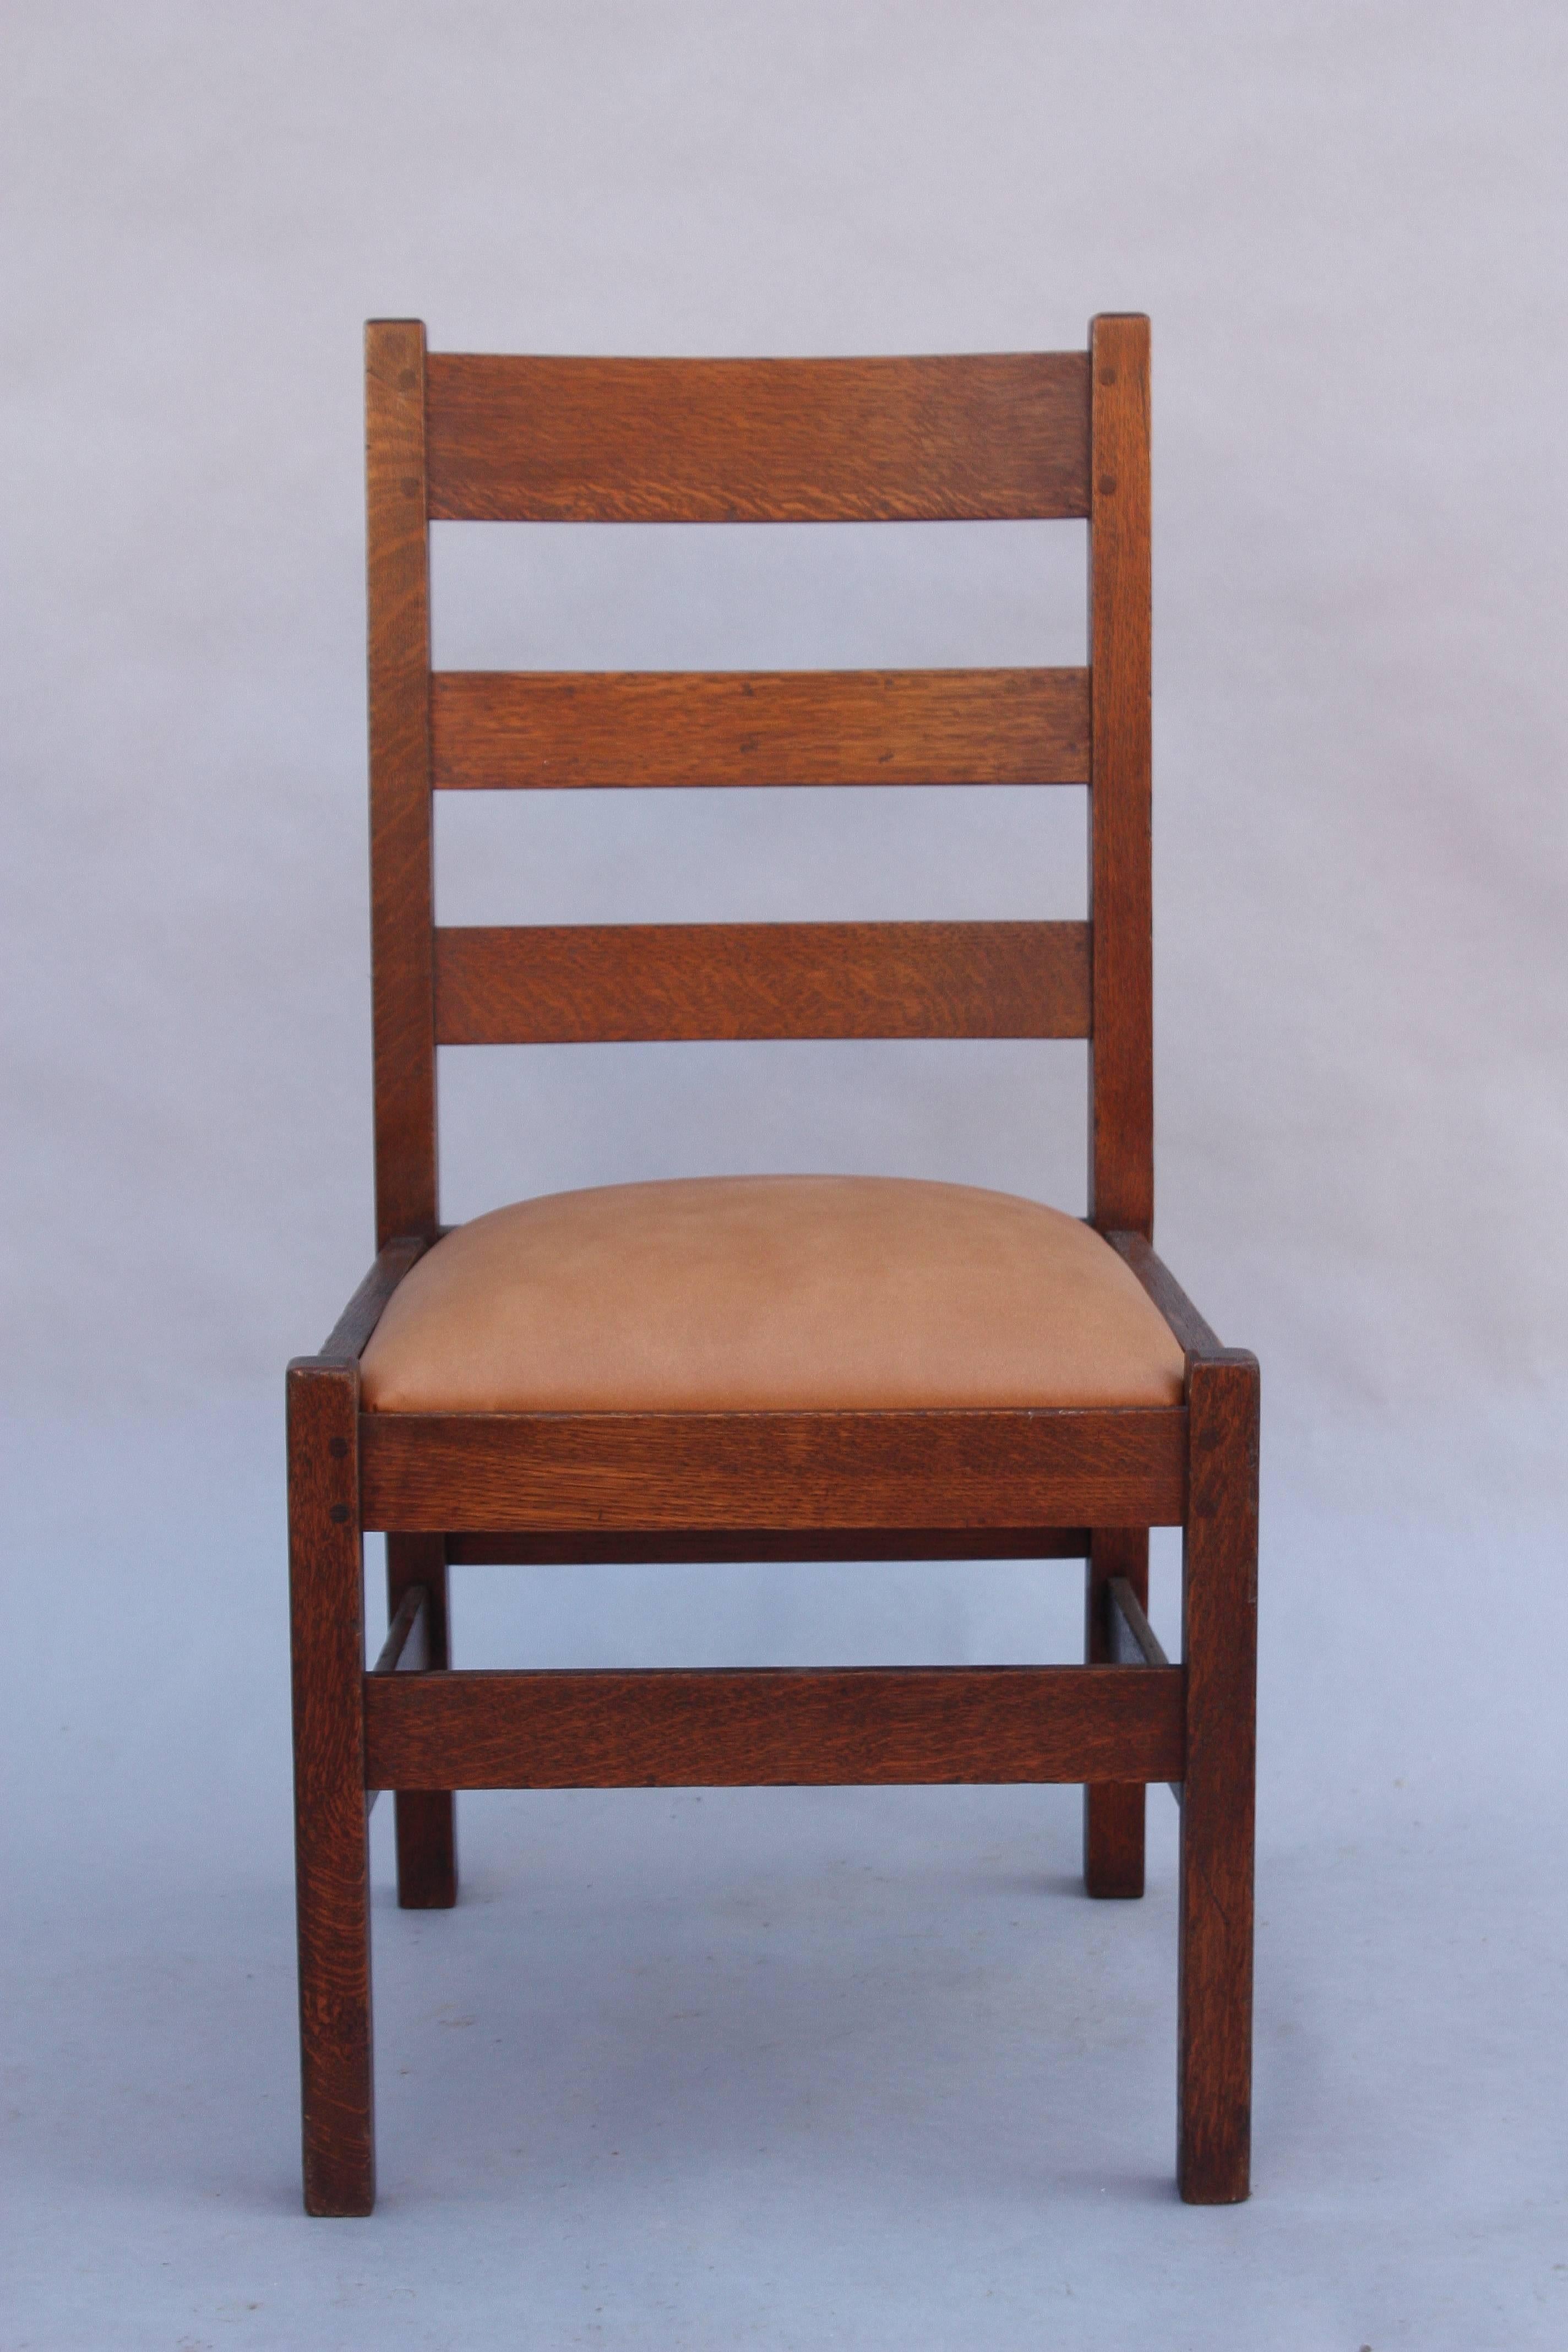 1910 Arts & Crafts Ladder Back Chair In Good Condition For Sale In Pasadena, CA